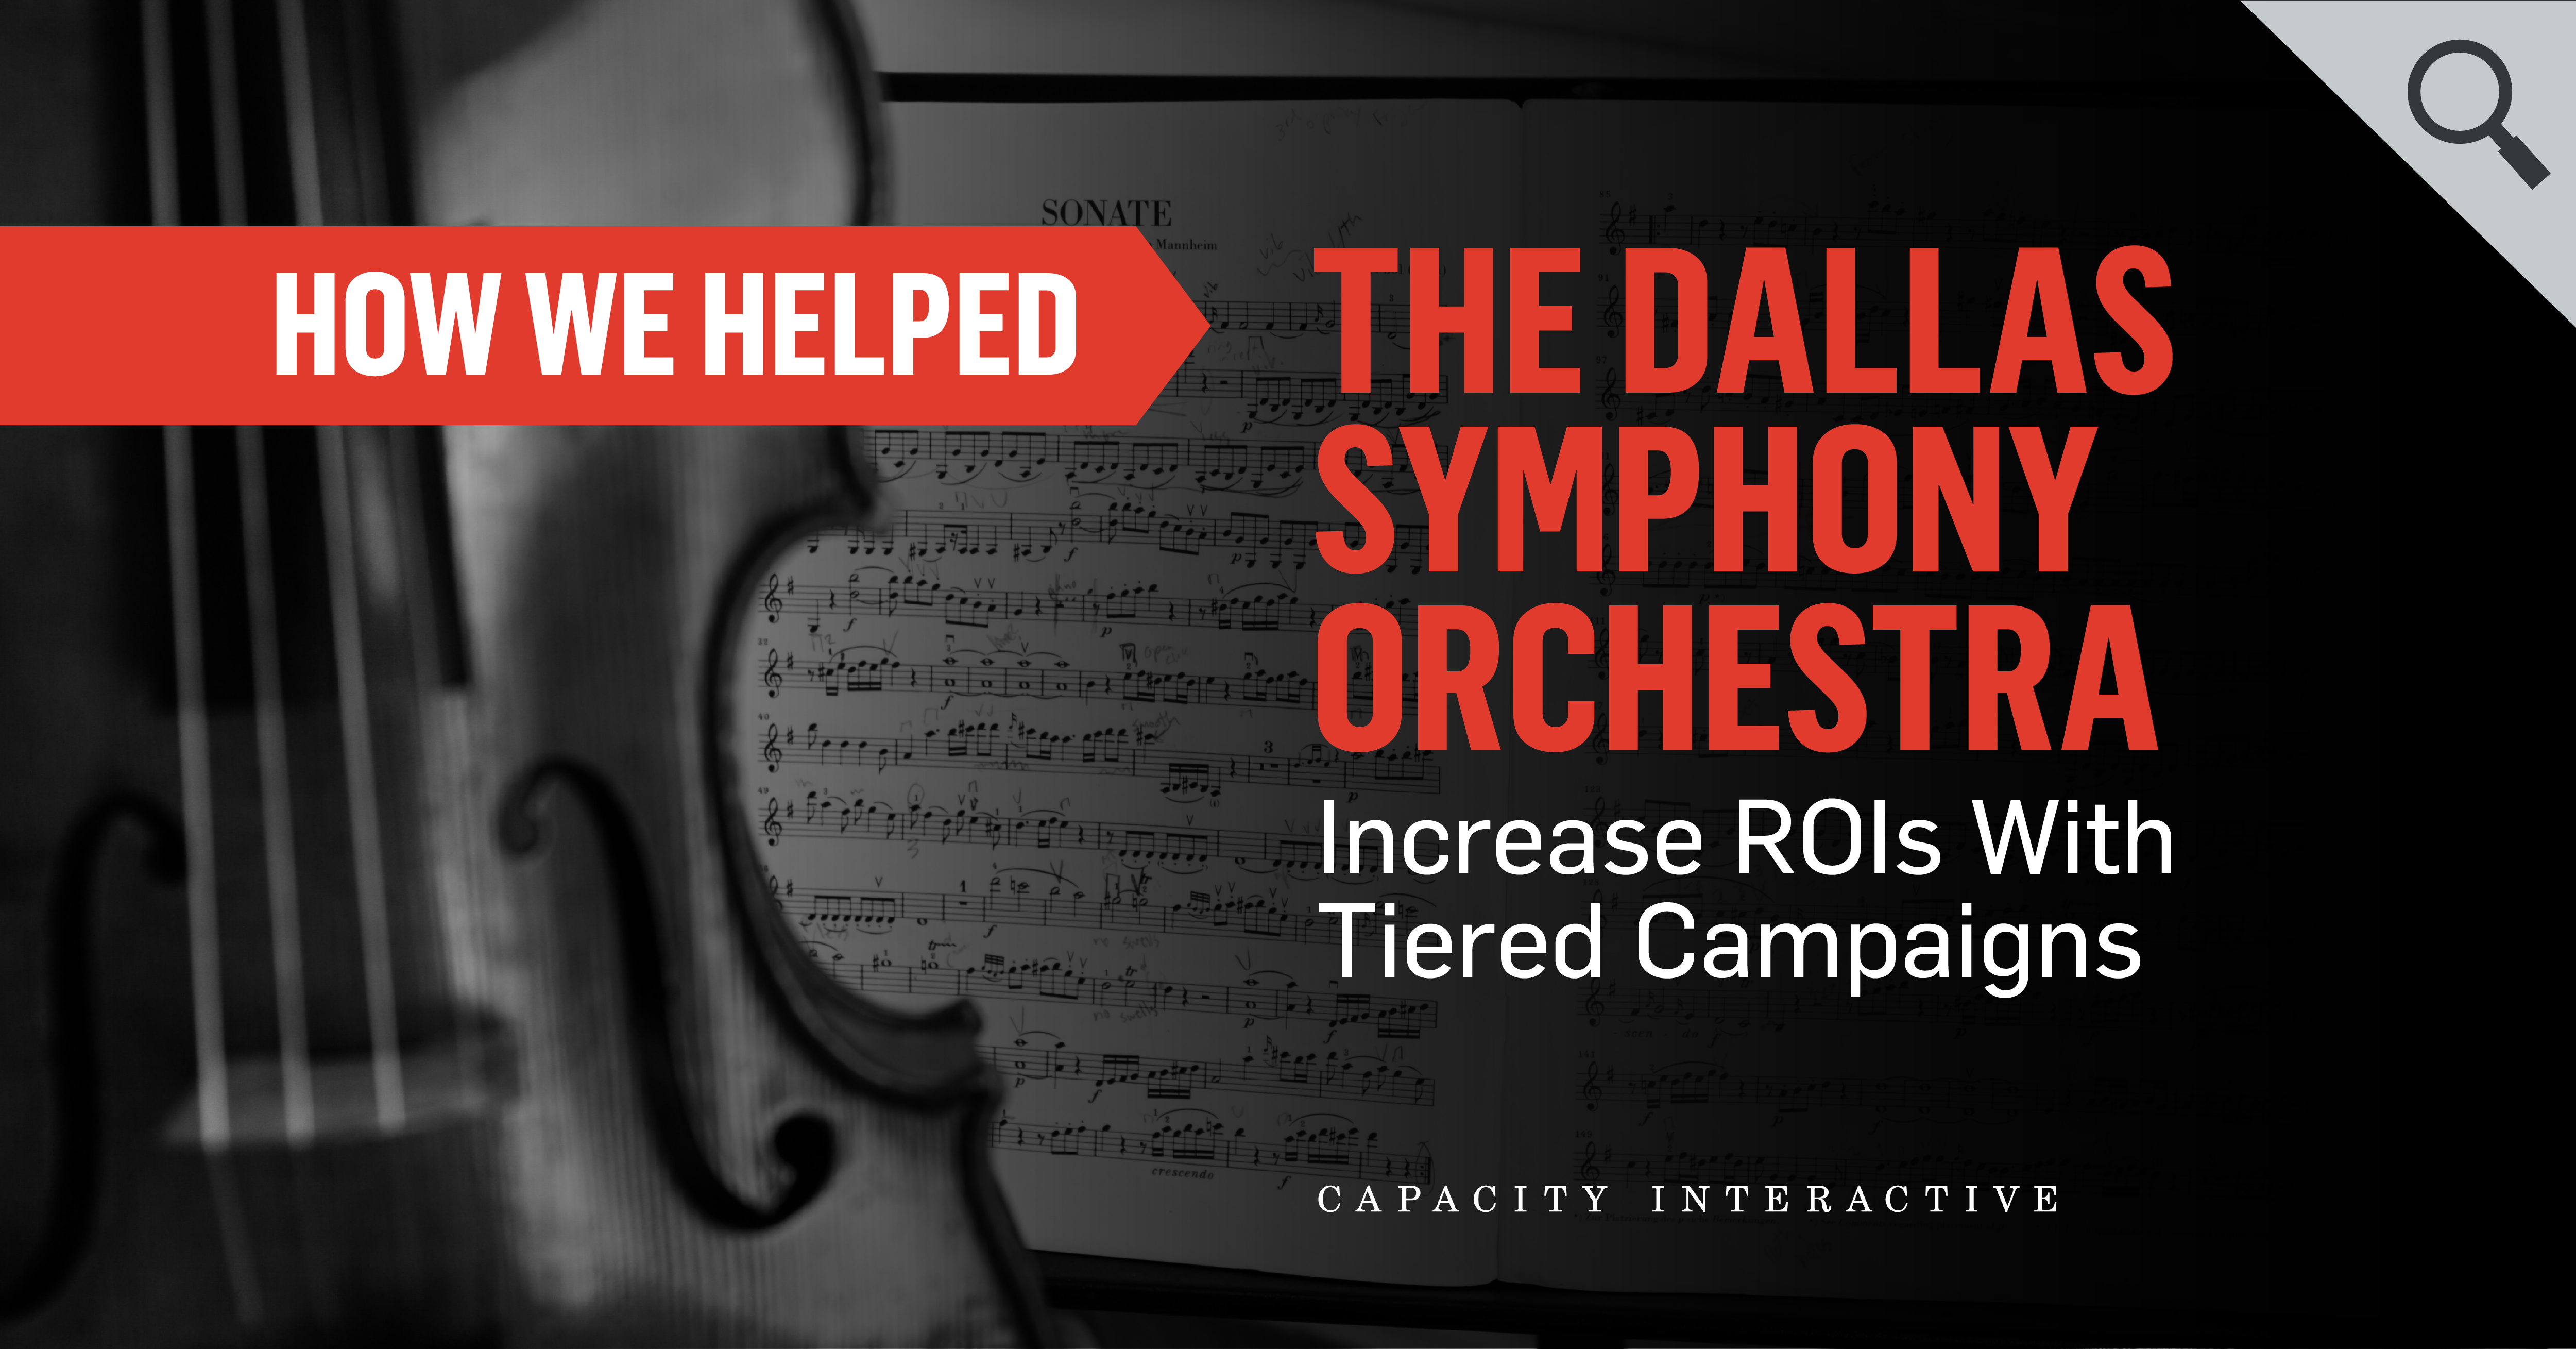 How We Helped The Dallas Symphony Orchestra Increase ROIs with Tiered Campaigns